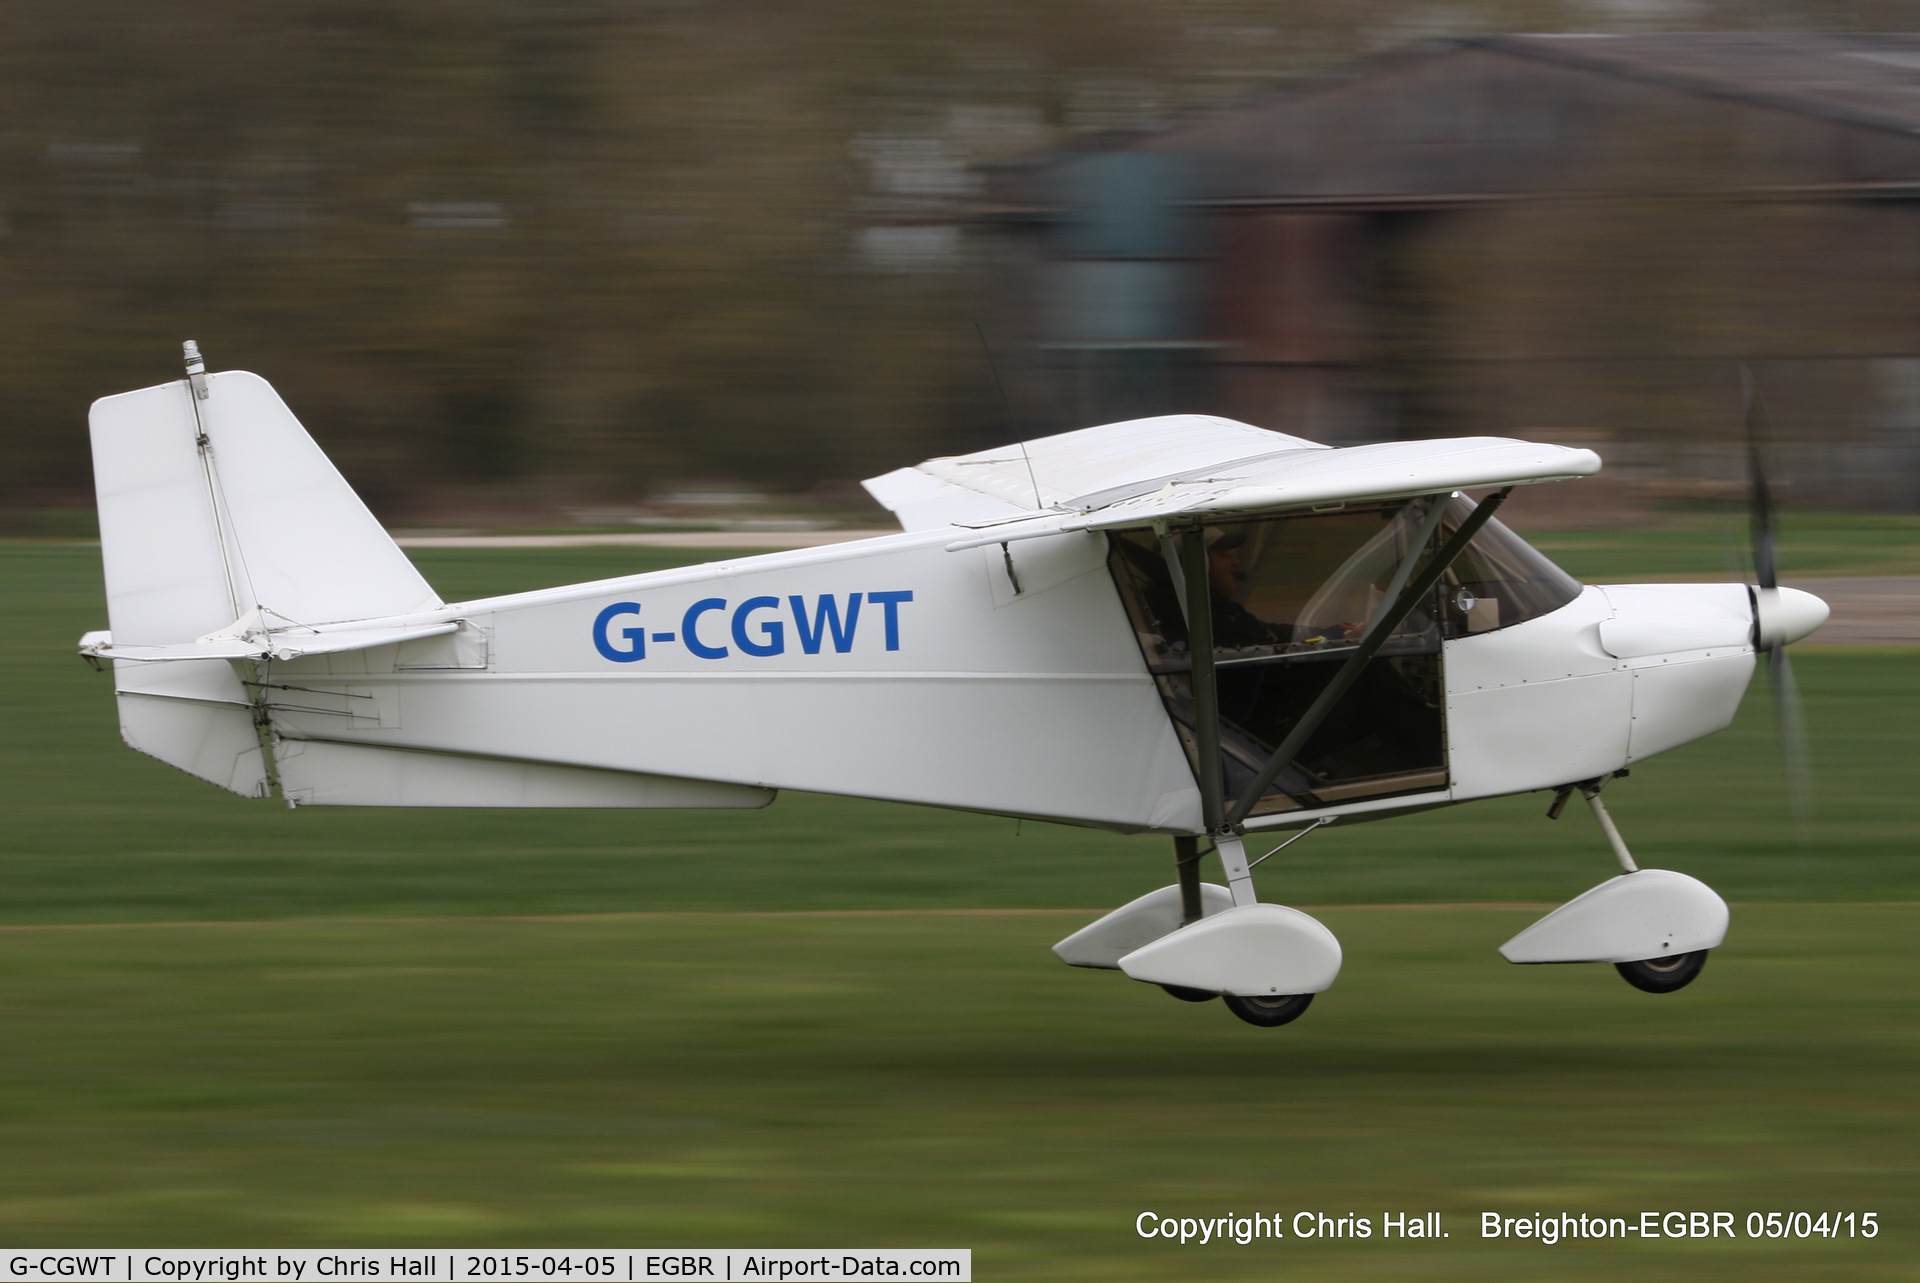 G-CGWT, 2008 Best Off SkyRanger Swift 912(1) C/N BMAA/HB/567, at the Easter Homebuilt Aircraft Fly-in